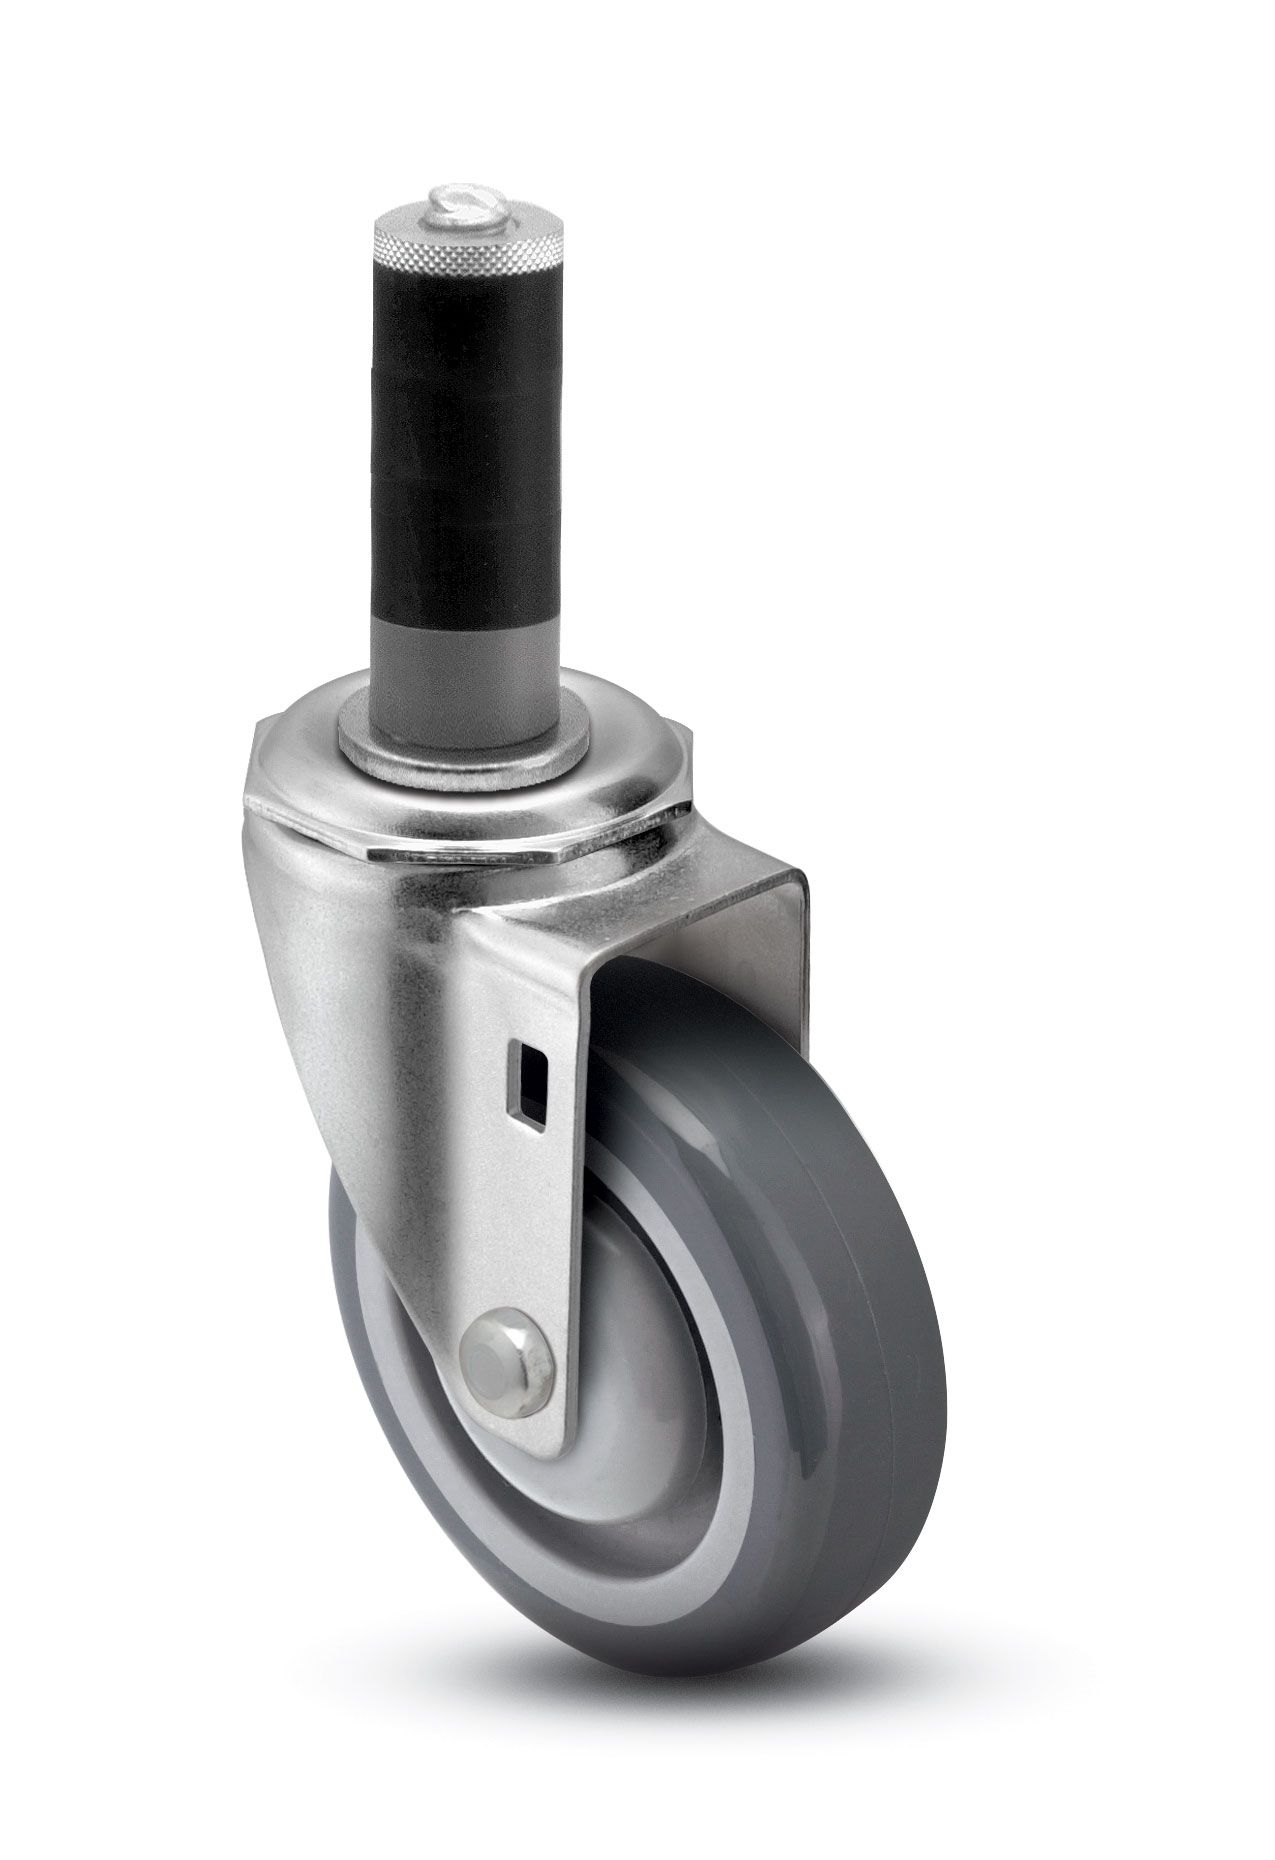 Caster; Swivel; 5" x 1-1/4"; TPR Rubber; Expandable Adapter (1-1/2" - 1-9/16" ID tubing); Zinc; Precision Ball Brng; 300#; Total Lock; Dust Cover (65055)